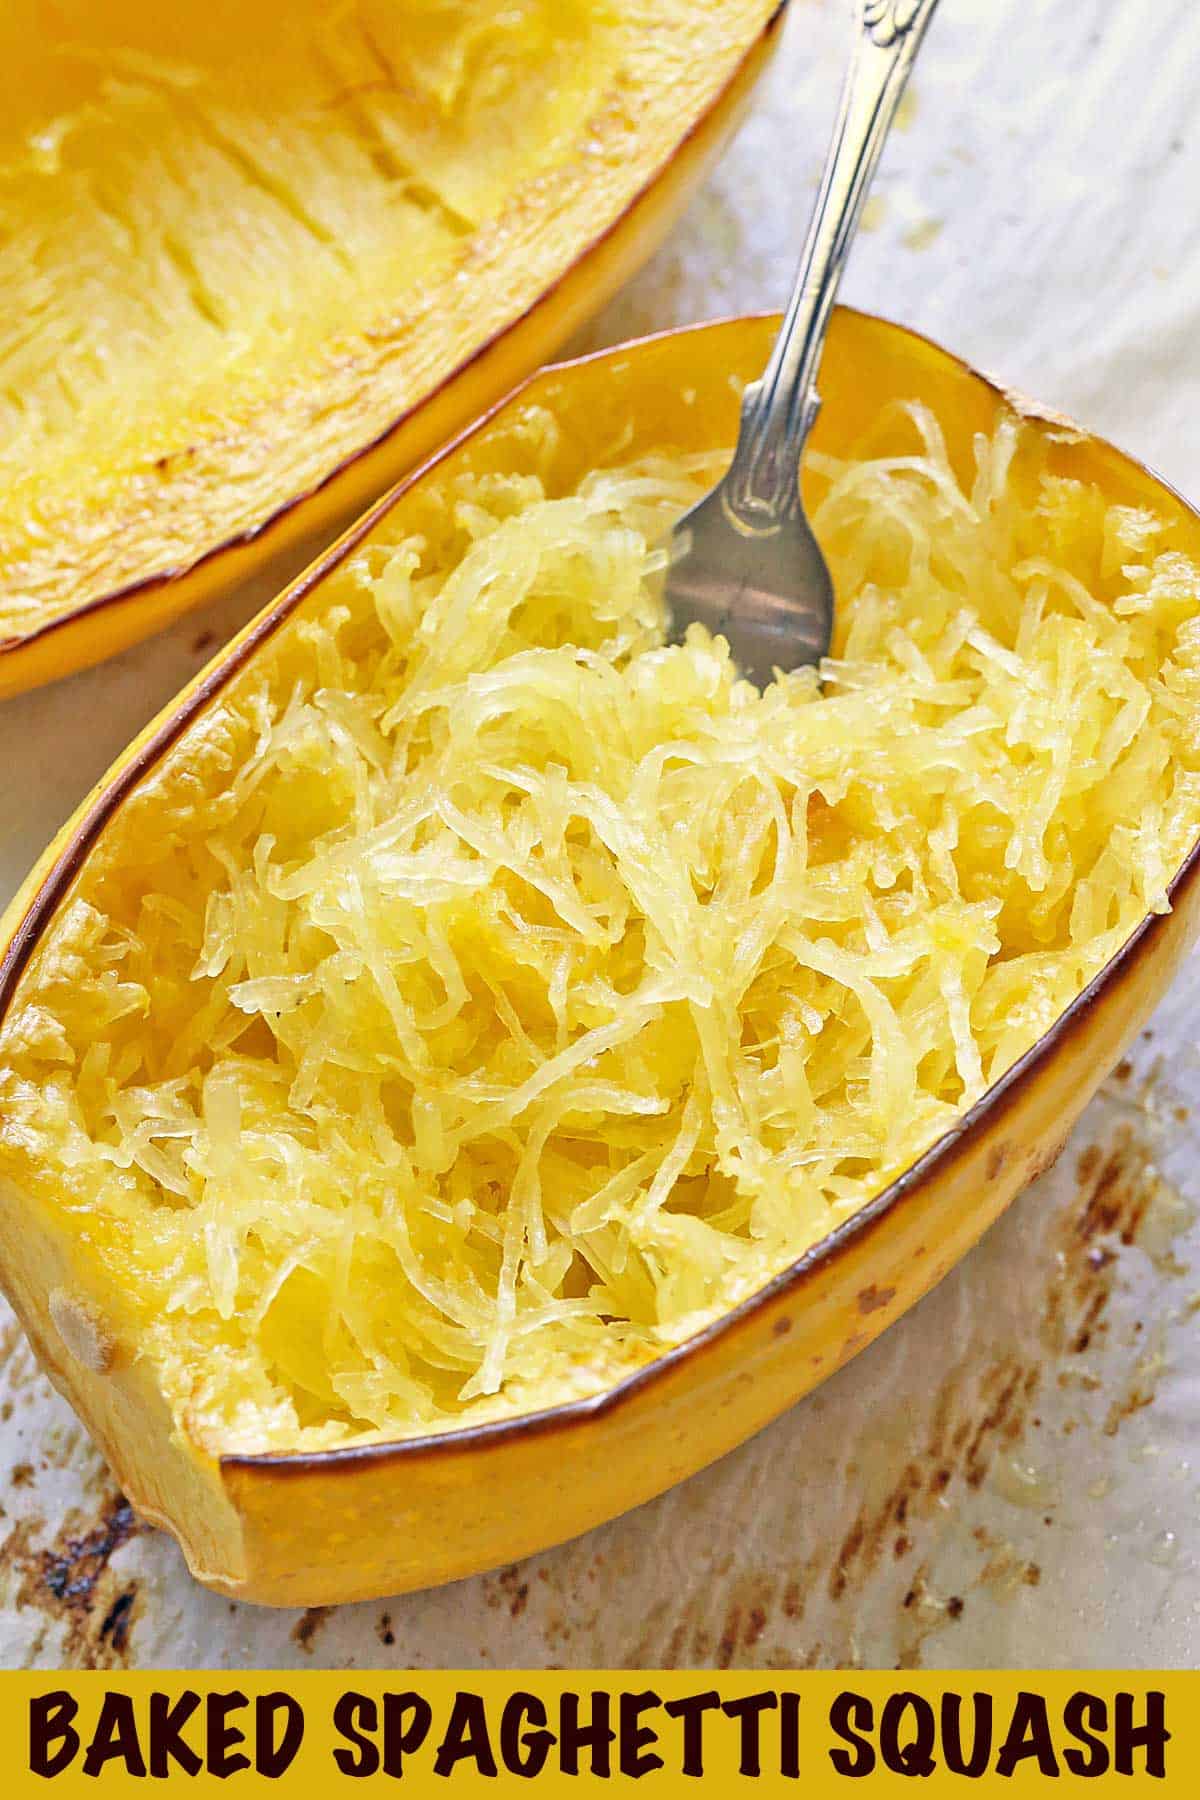 Oven-baked spaghetti squash on a baking sheet.  